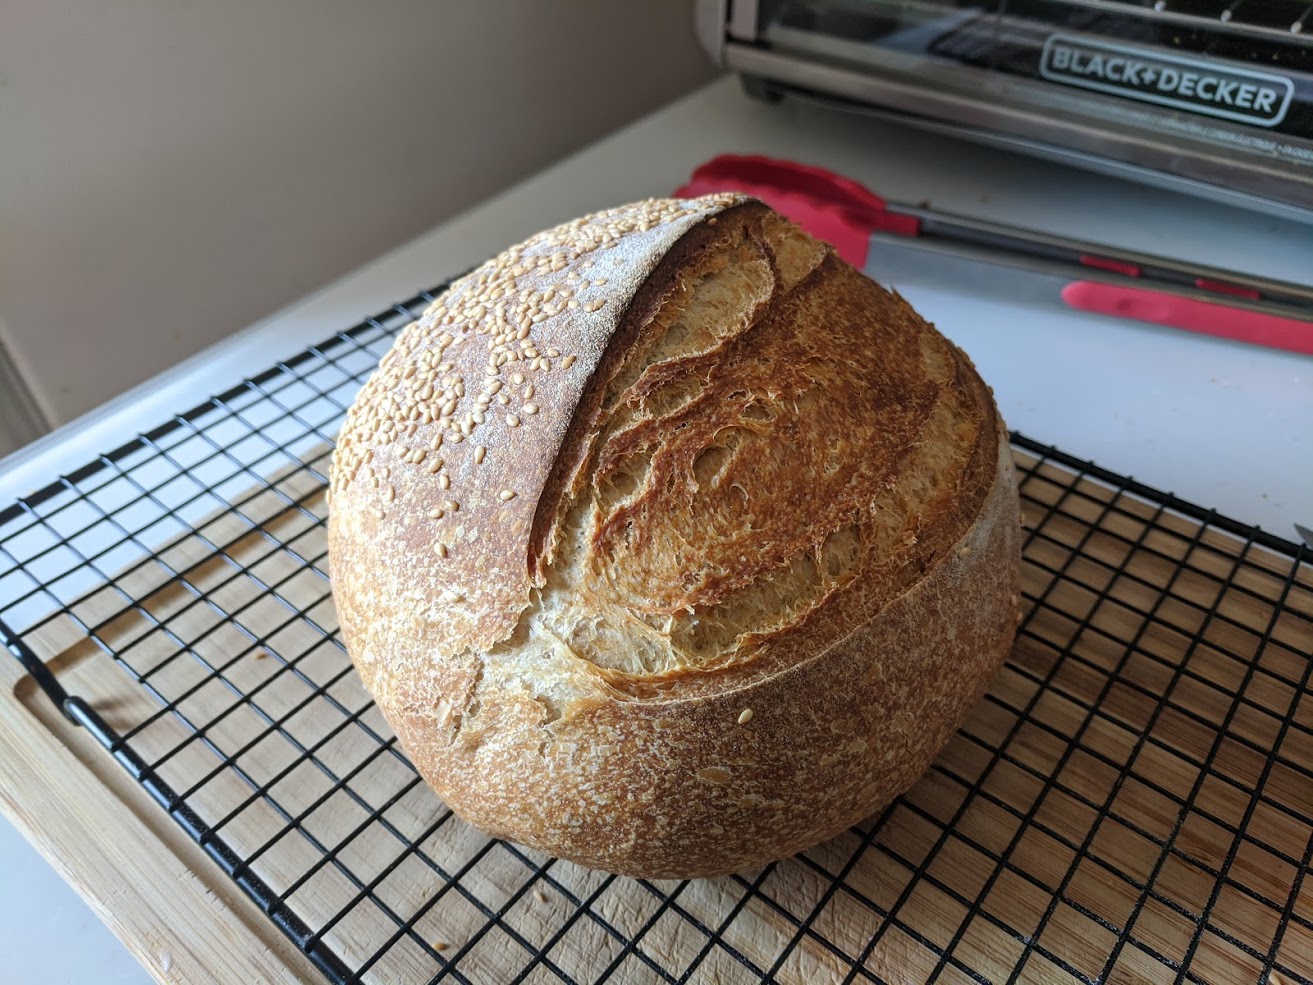 March 3, 2021. I also use a recipe that calls for bread flour and olive oil, this is usually how it turns out. Very round, very small but uniformly distributed air pockets. Has a savoury taste, especially if you let it rest in the fridge for a day or two.